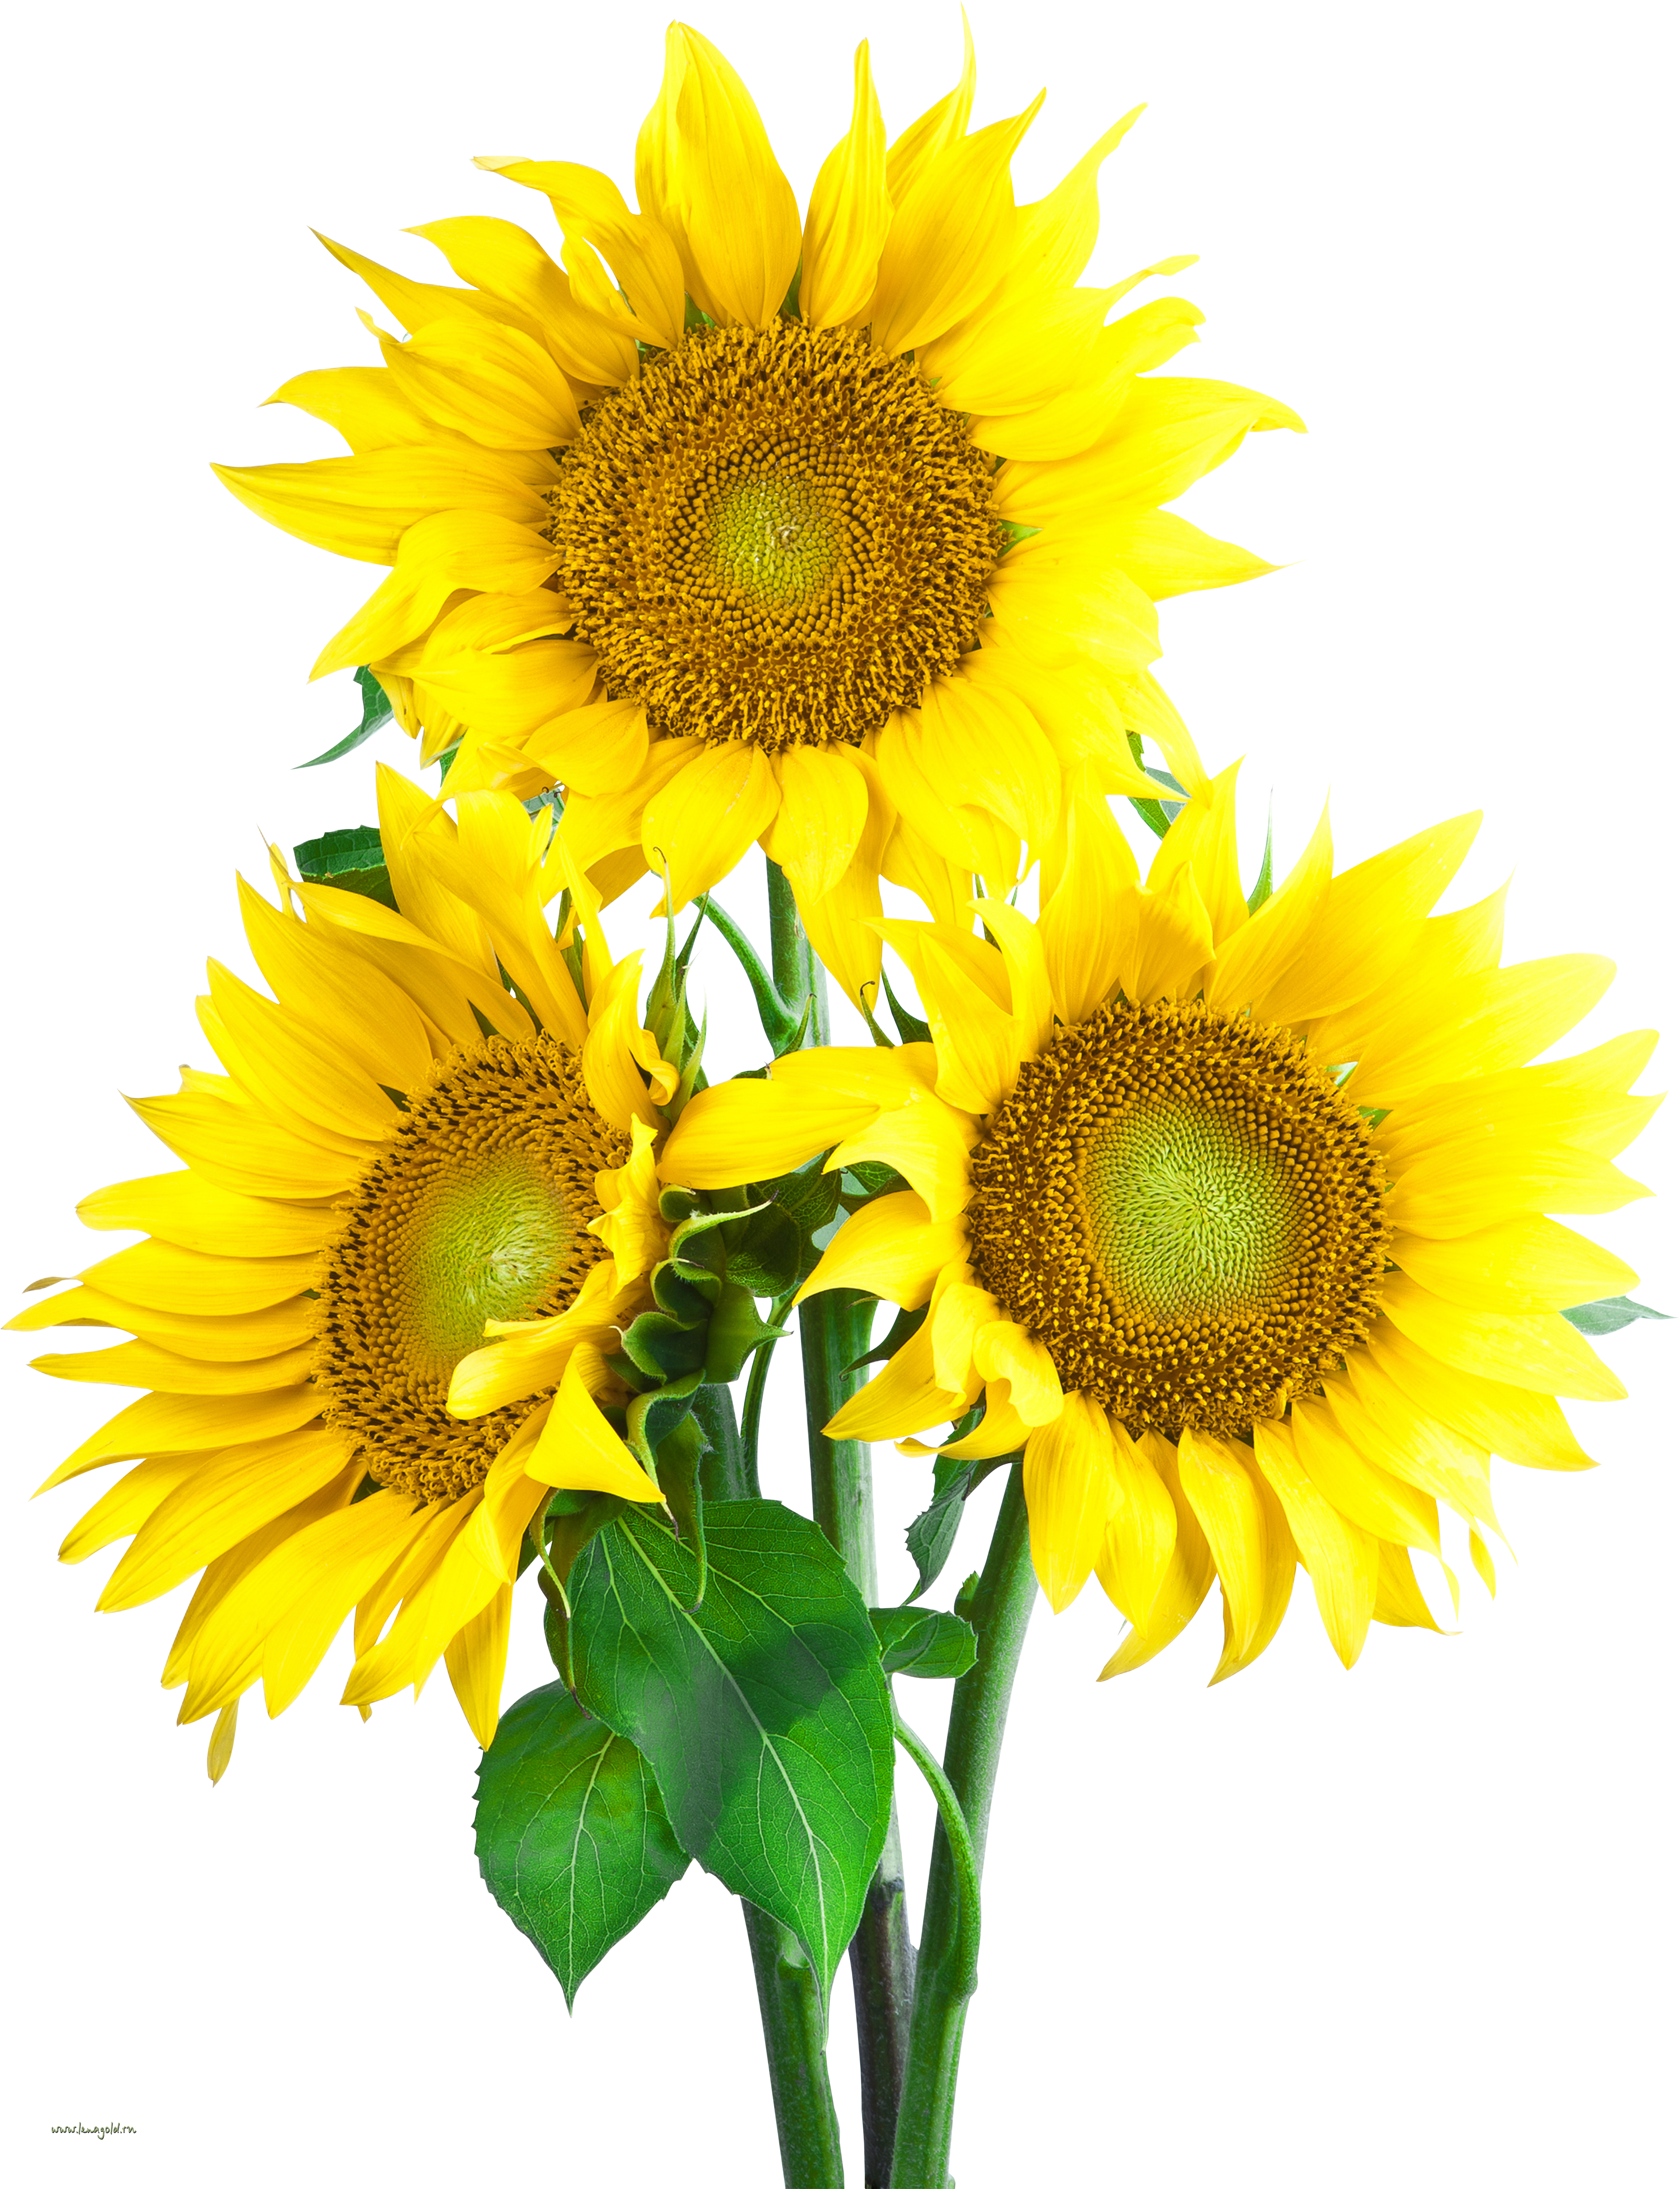 File:A sunflower-Edited.png